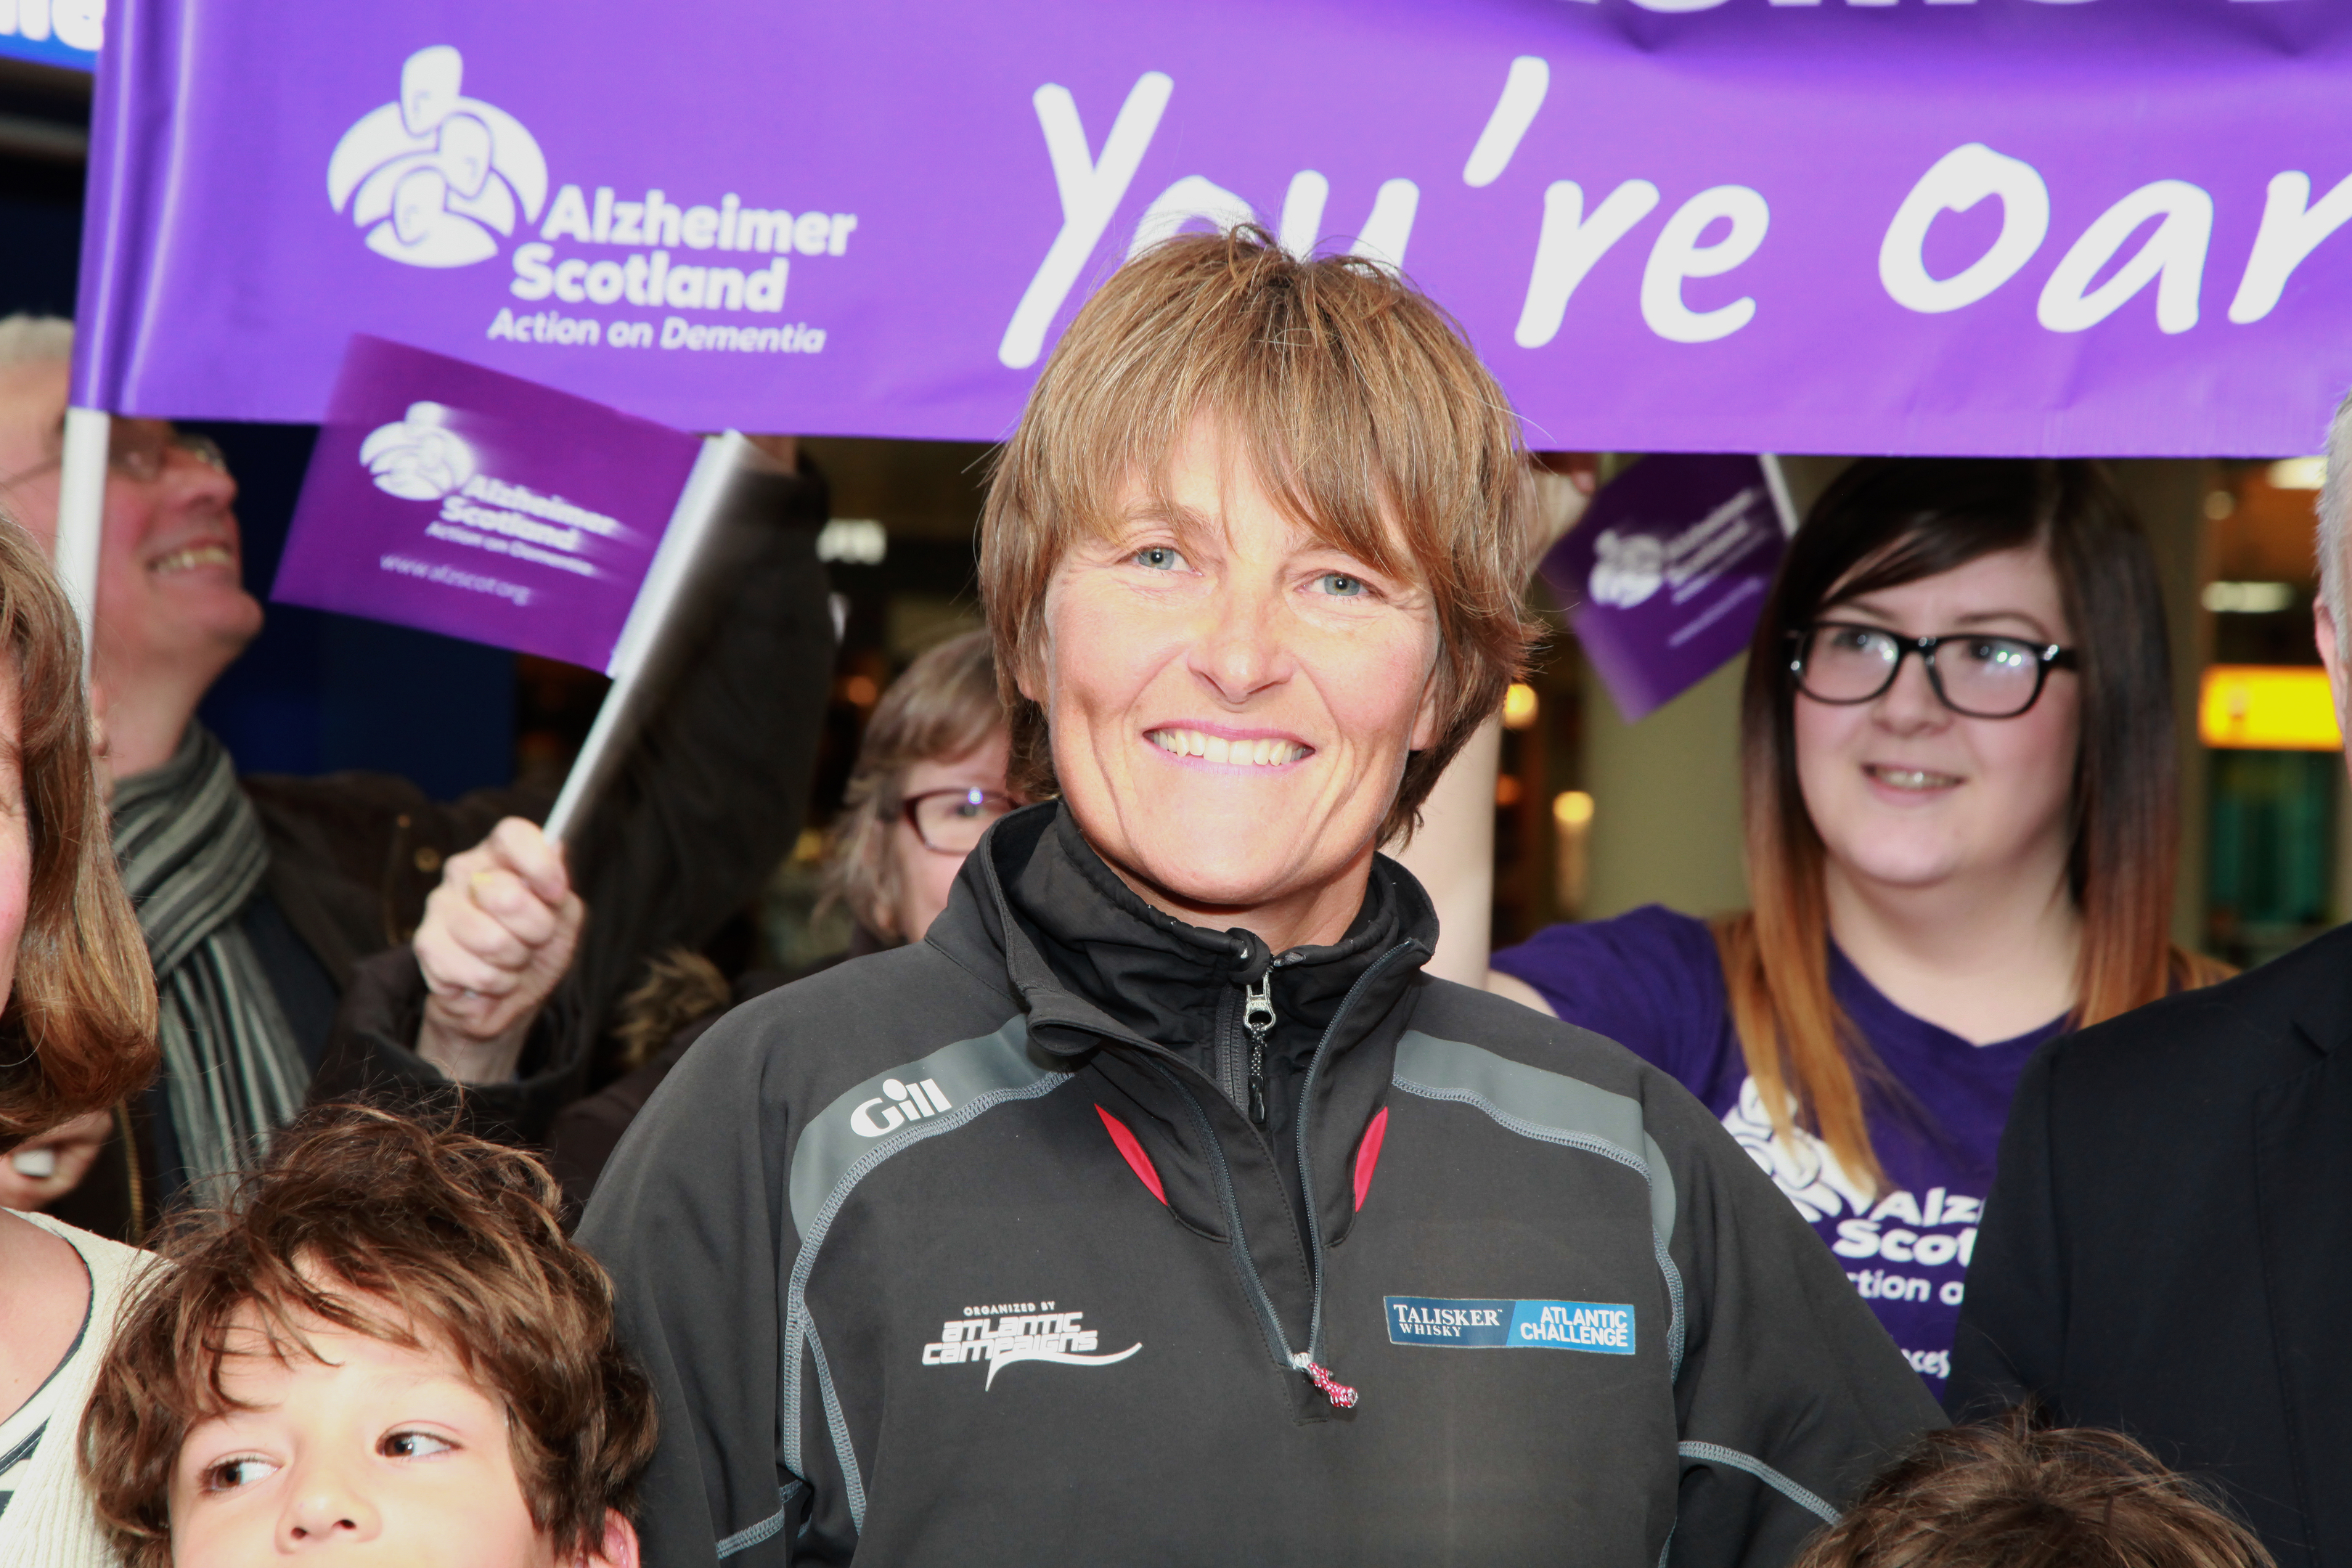 Elaine Hopley was welcomed home by supporters (Alzheimer Scotland)